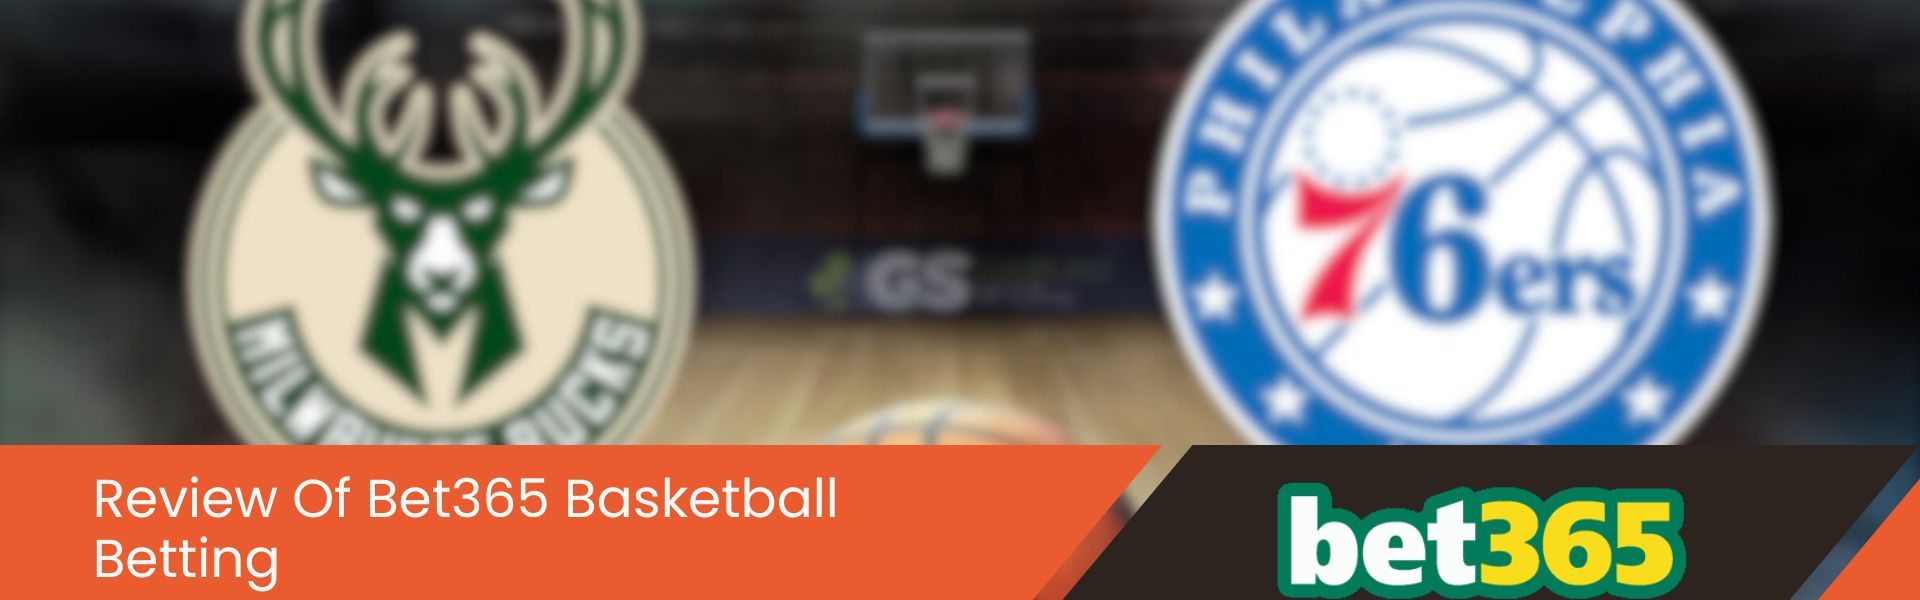 Review Of Bet365 Basketball Betting